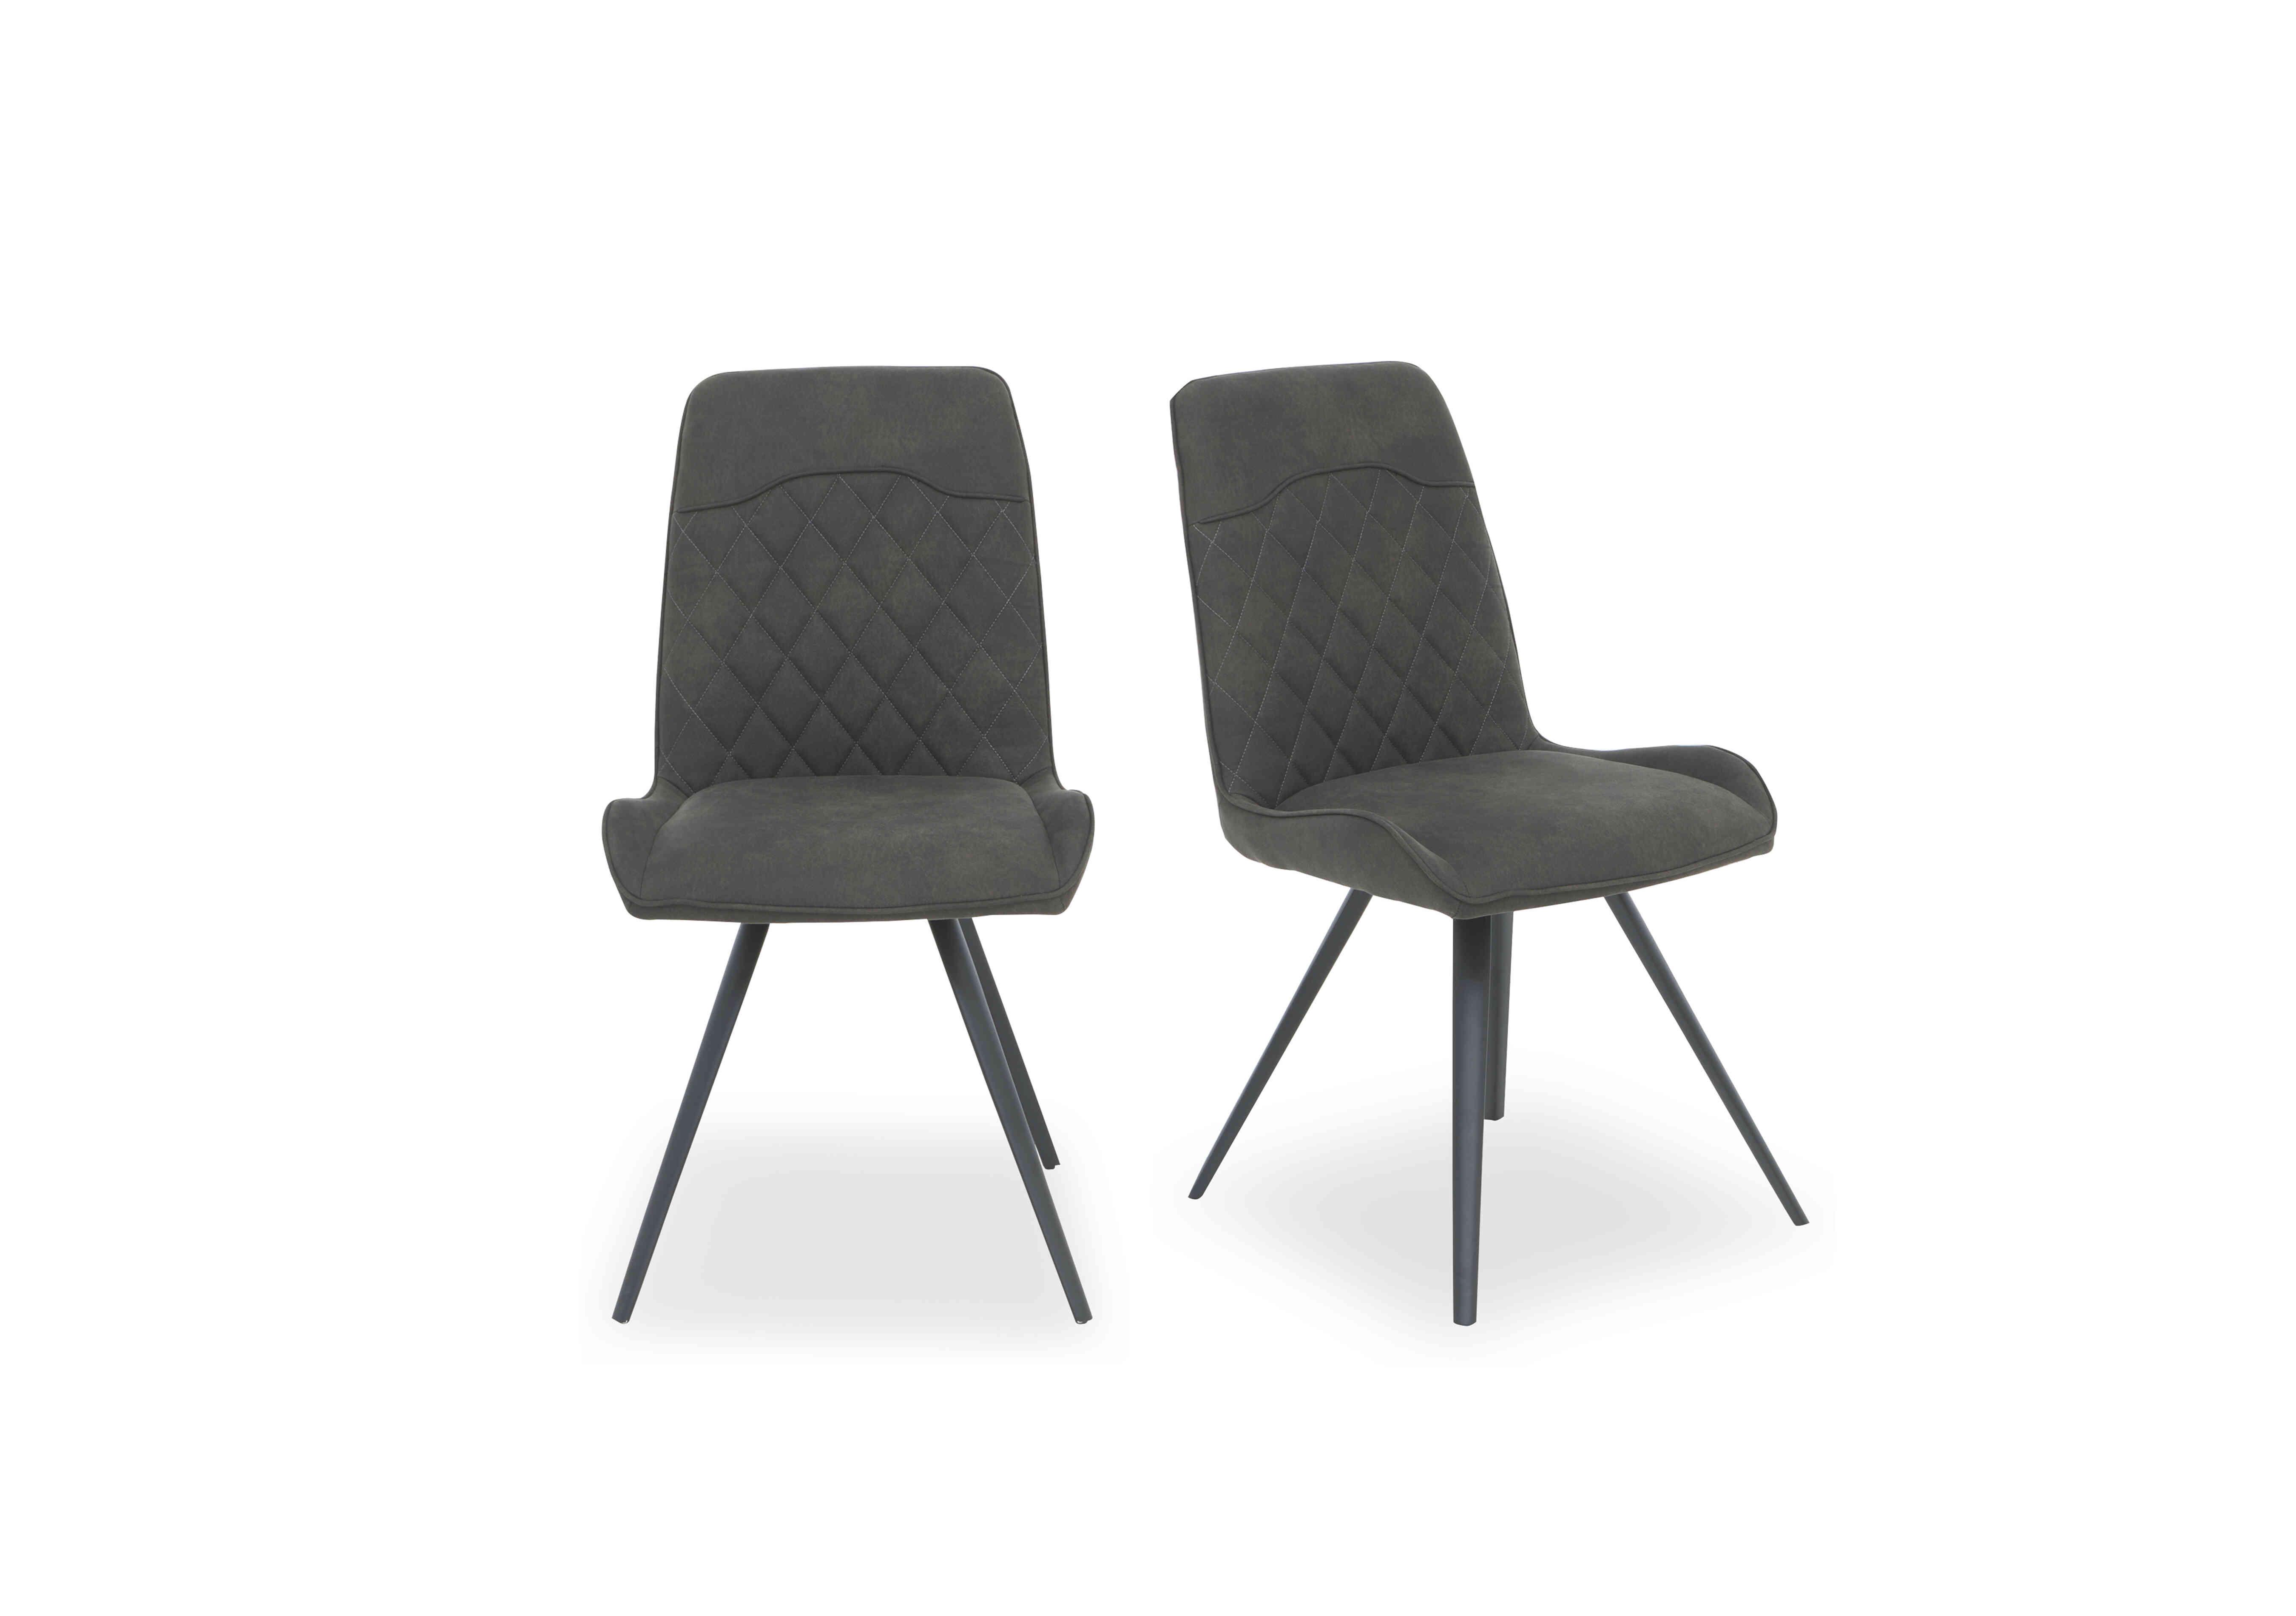 Warrior Pair of Standard Dining Chairs in Grey on Furniture Village